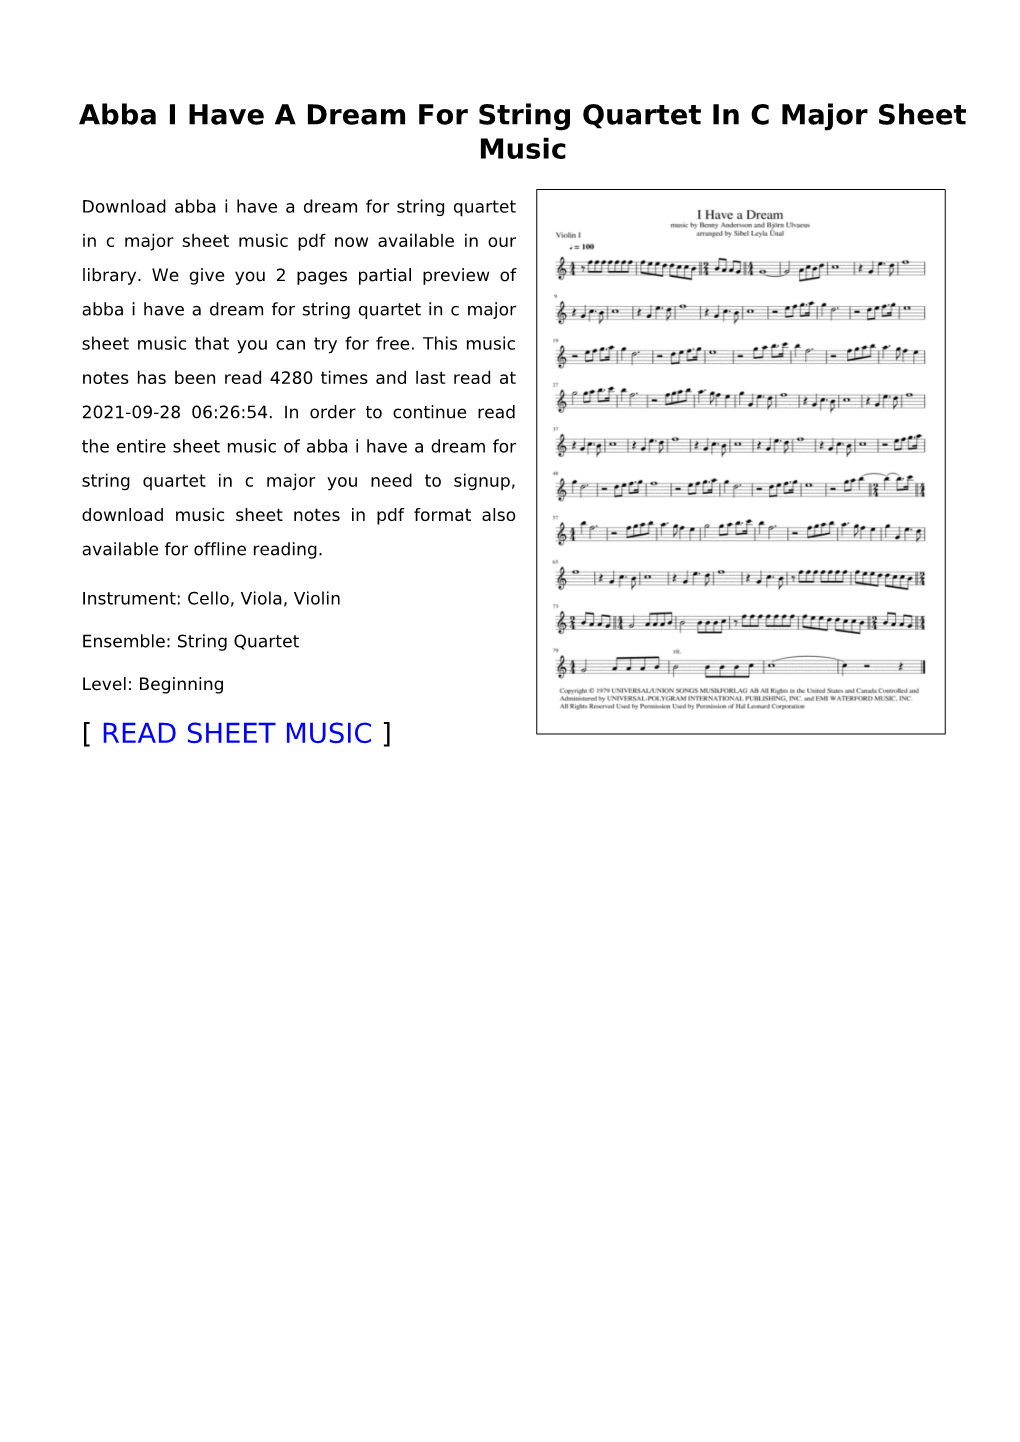 Abba I Have a Dream for String Quartet in C Major Sheet Music